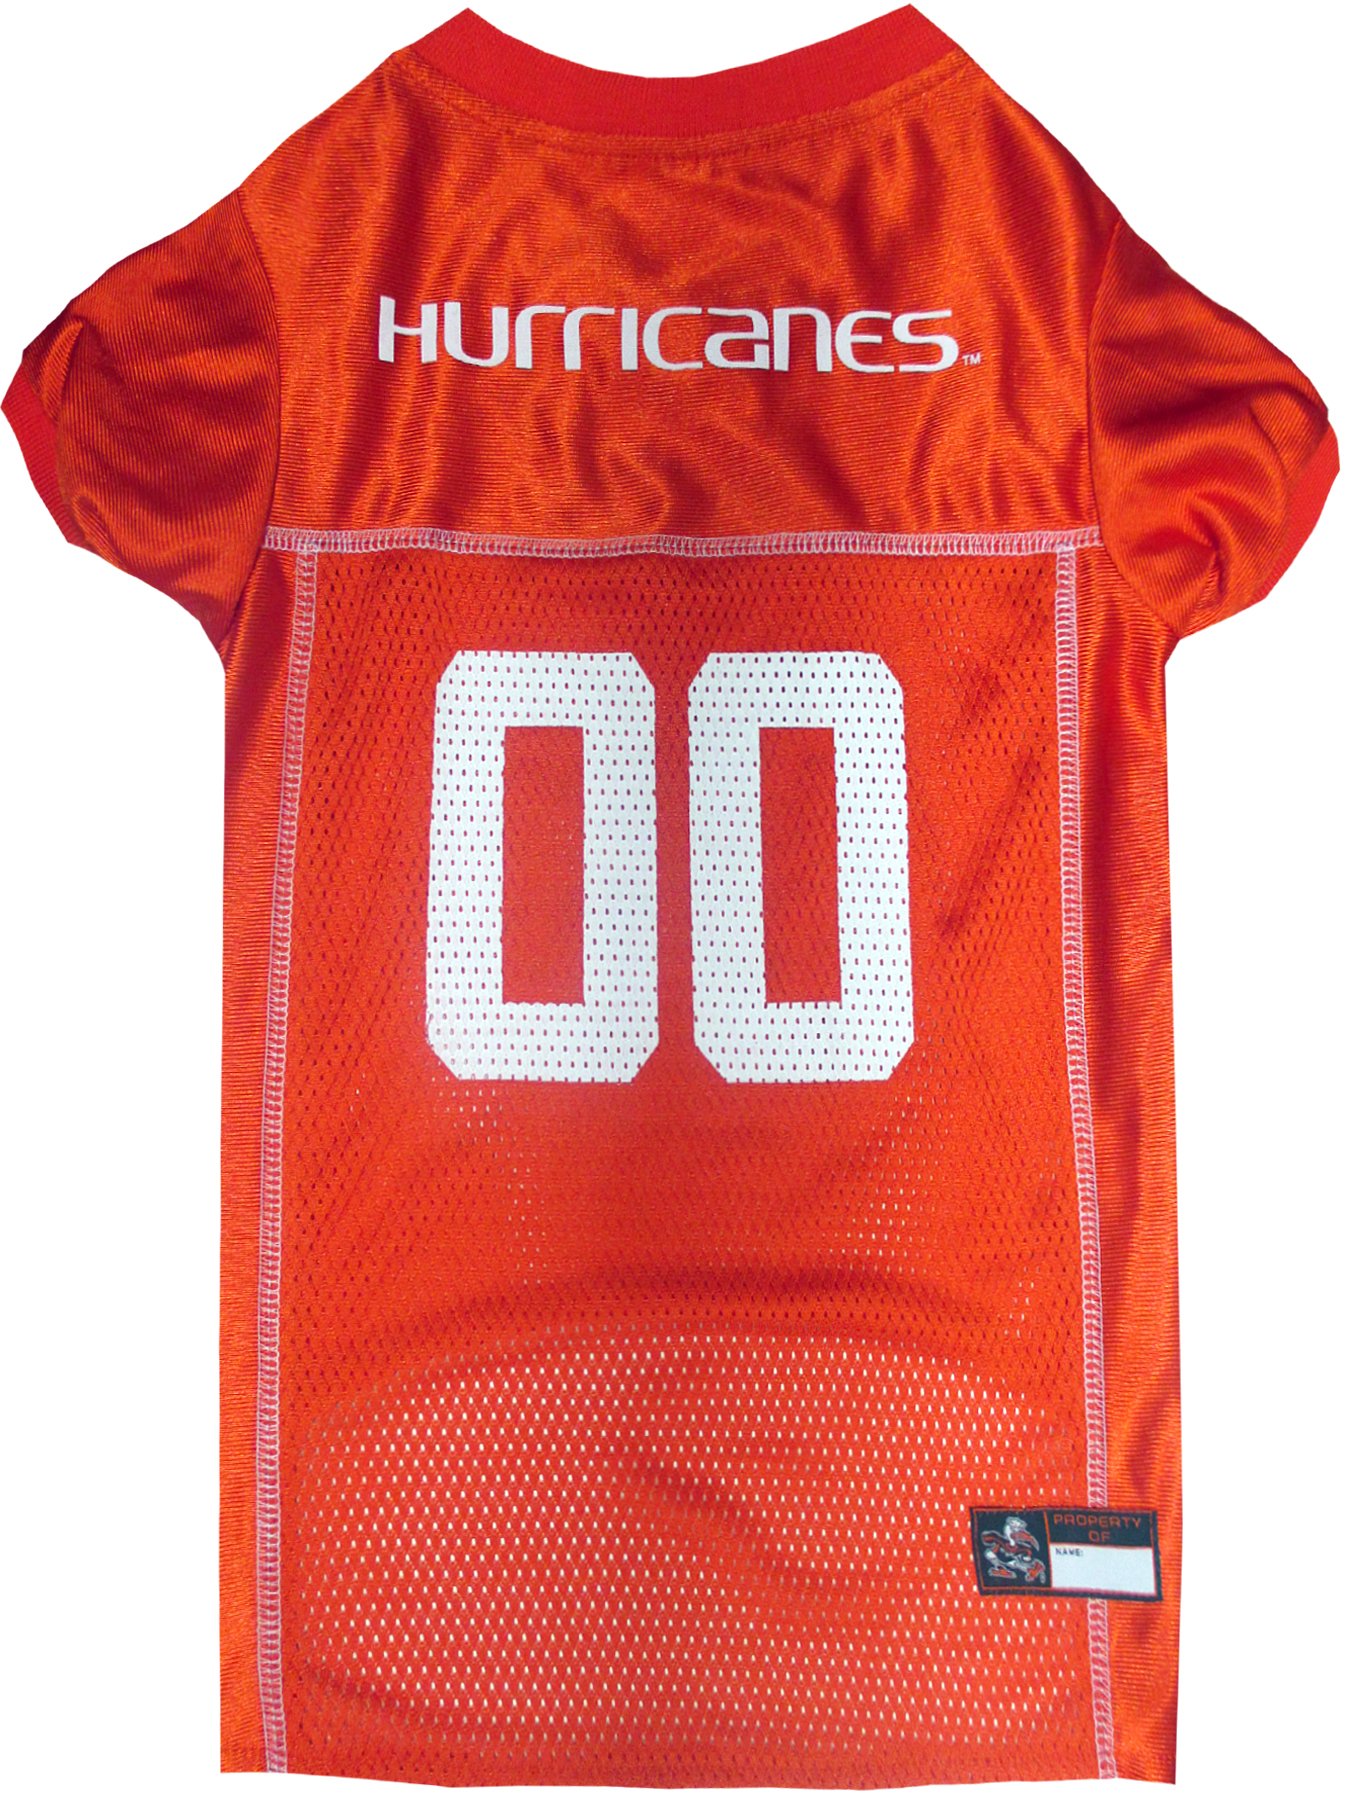 Pets First NcAA college Miami Hurricanes University Mesh Jersey for DOgS  cATS, Medium Licensed Big Dog Jersey with your Favorite FootballB